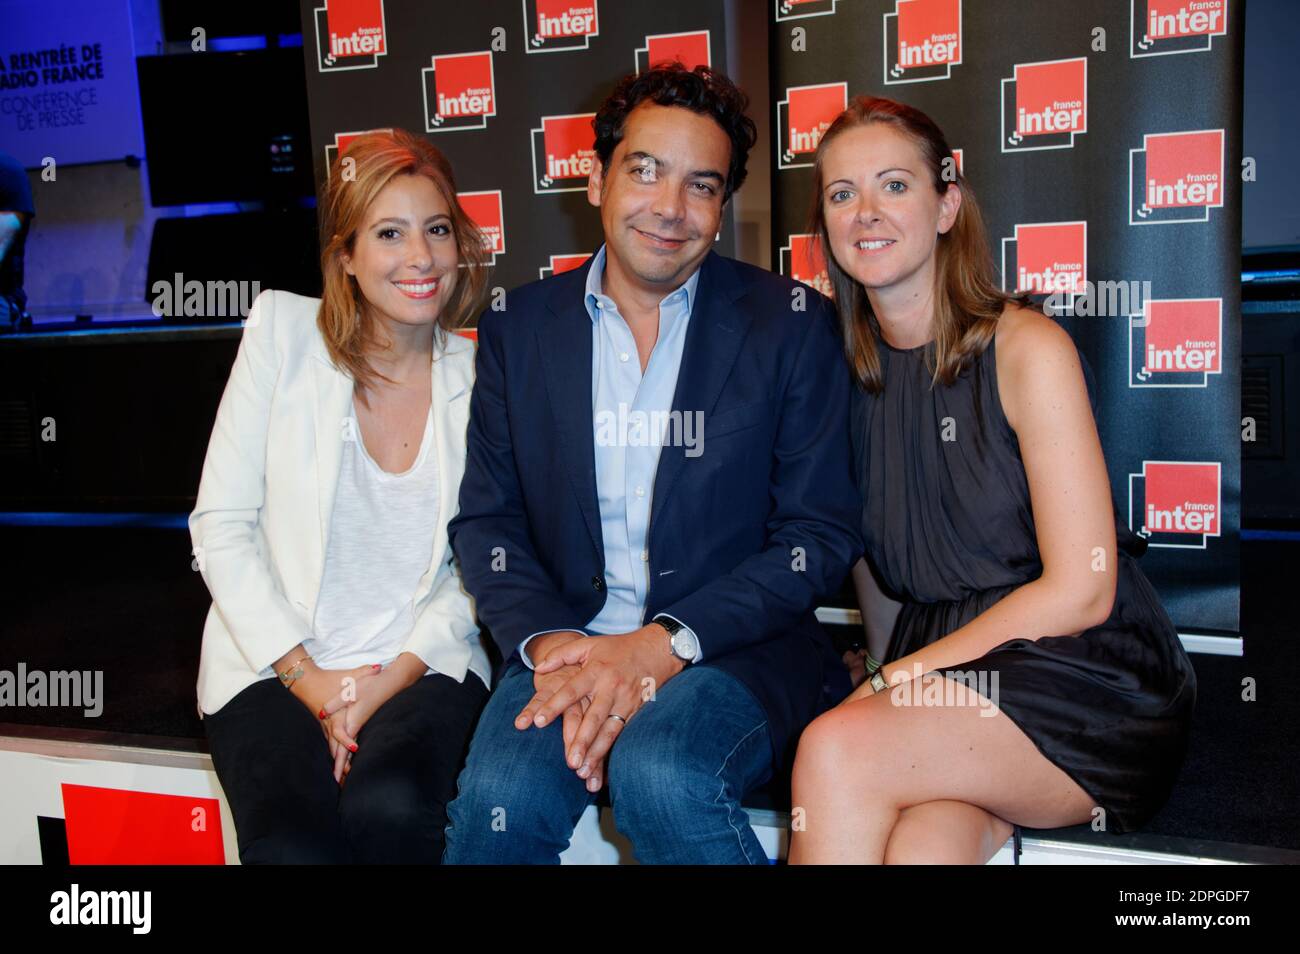 Léa Salamé, Charline Vanhoenacker, Patrick Cohen attending Radio France  radio station annual press conference in Paris, France, August 26, 2015.  Photo by Alban Wyters/ABACAPRESS.COM Stock Photo - Alamy